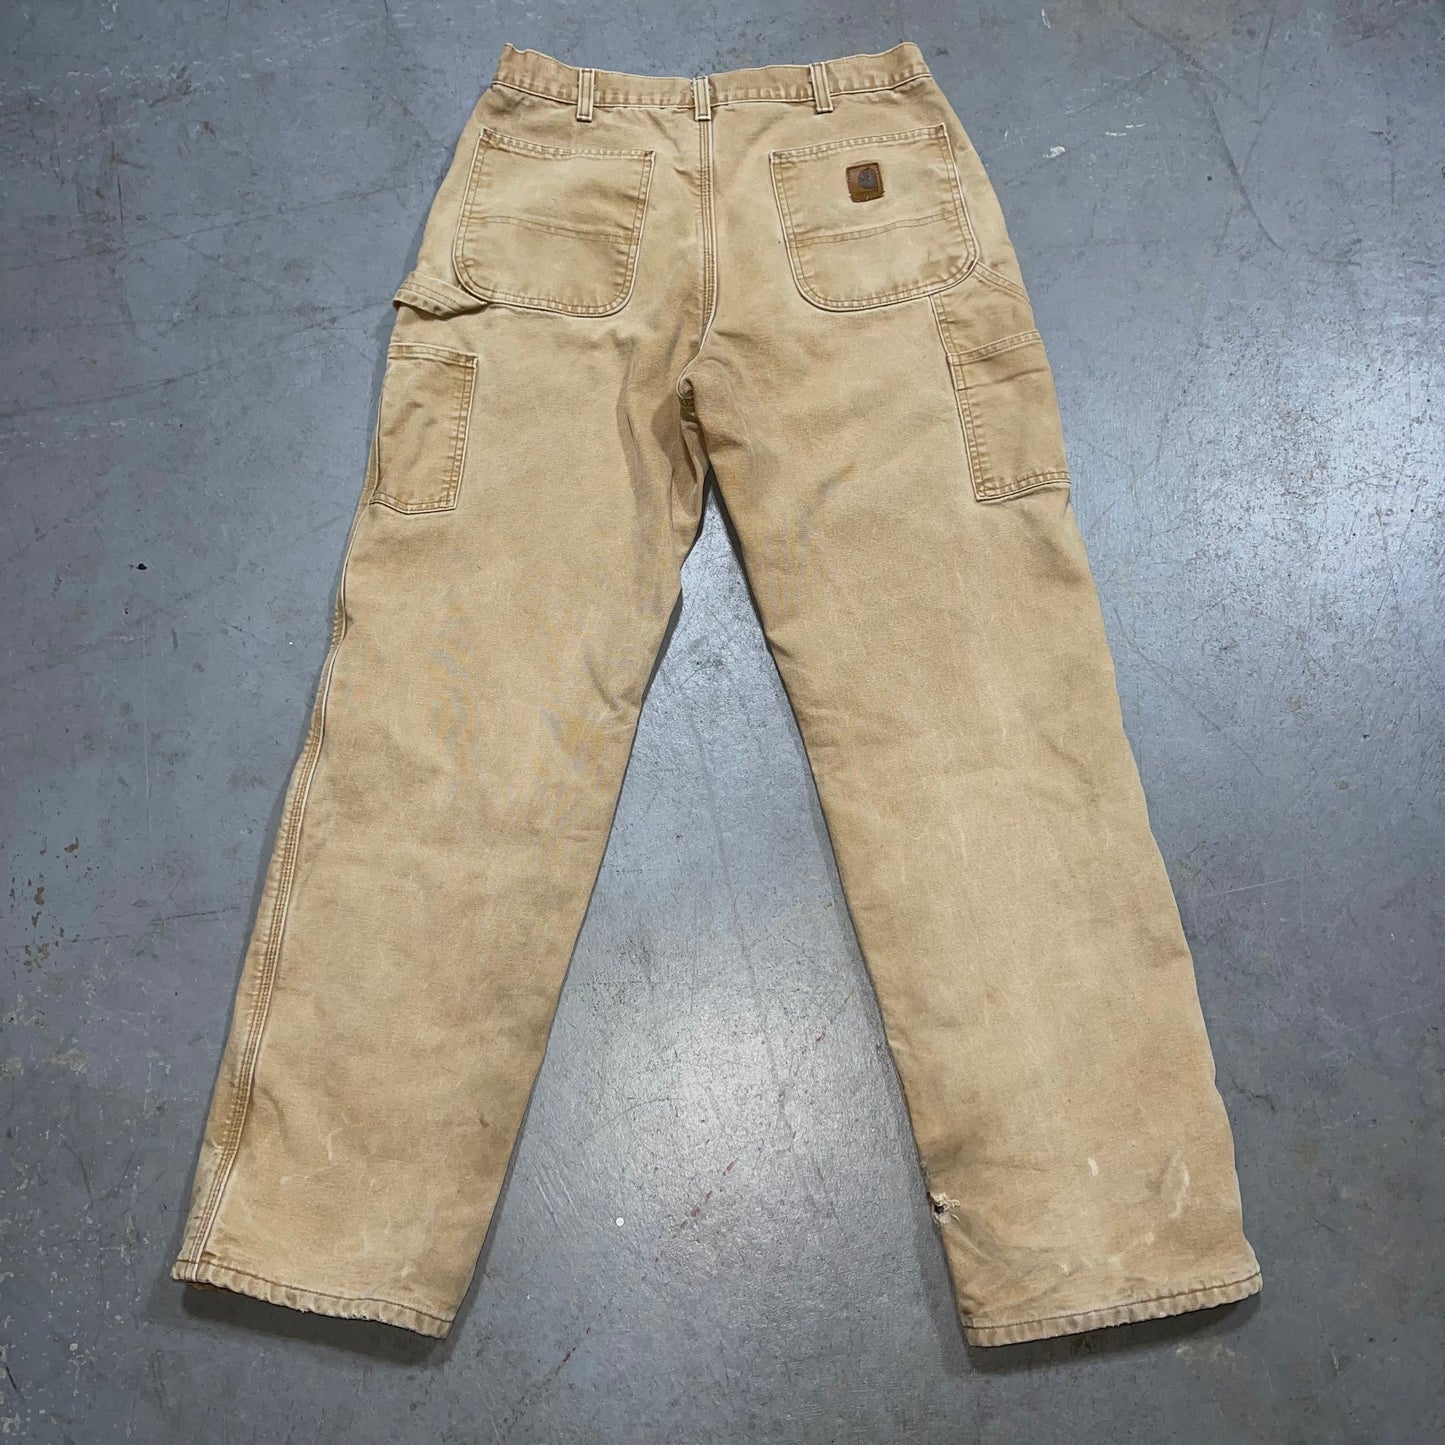 Vintage ‘09 Carhartt Flannel Lined Carpenter Dungaree Fit Pant. Size 34x34